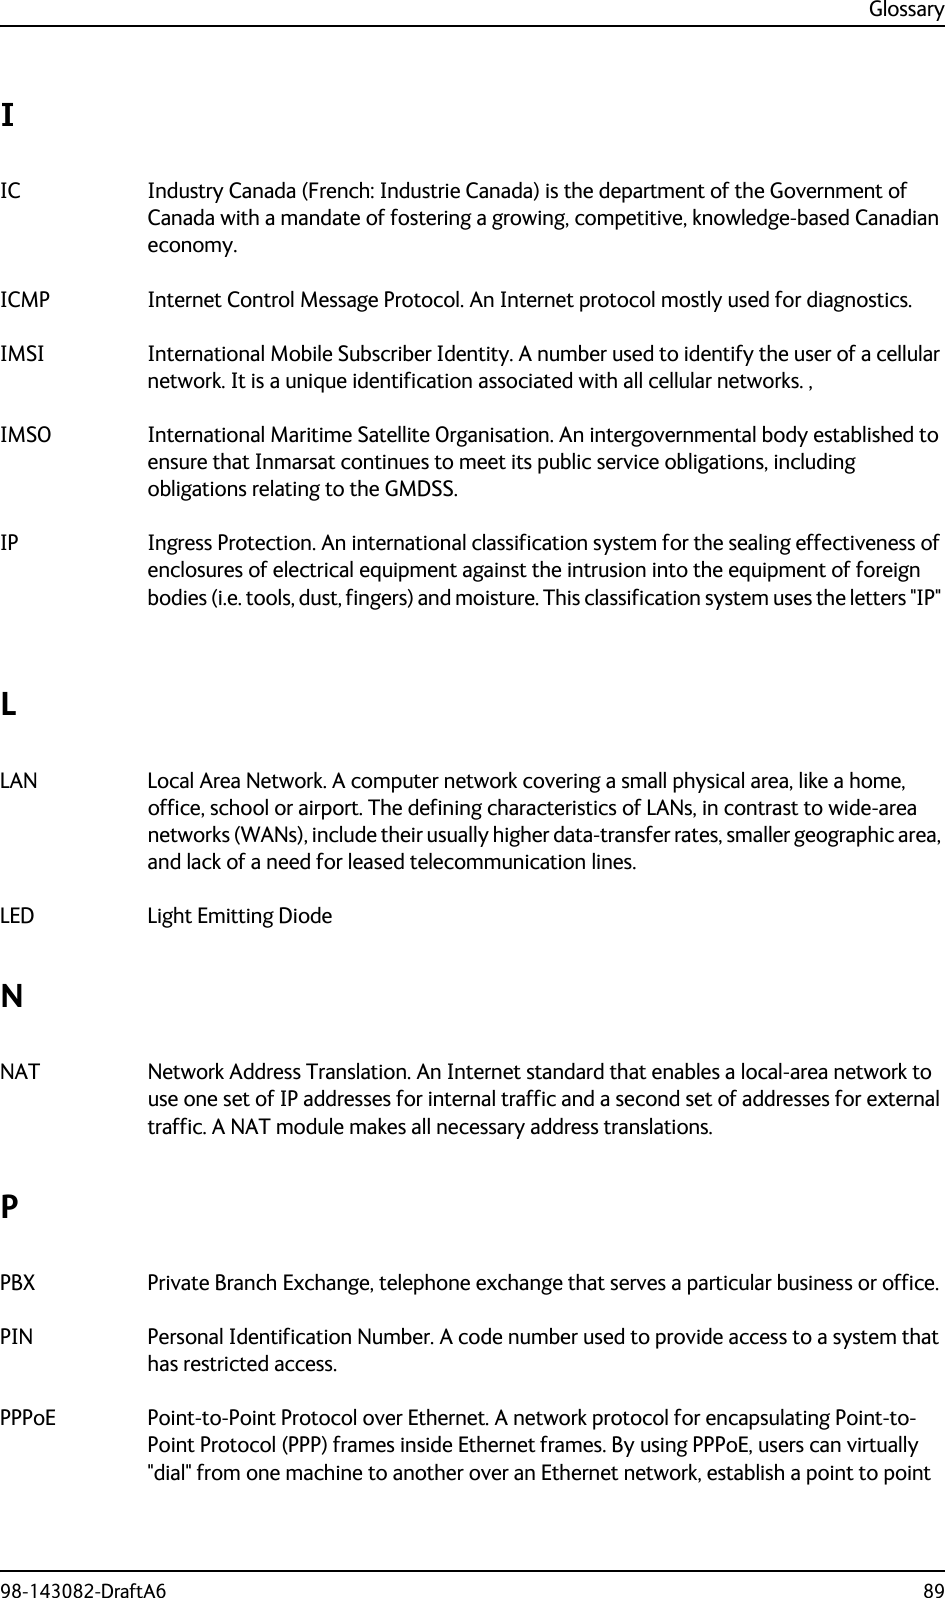 Glossary98-143082-DraftA6 89IIC Industry Canada (French: Industrie Canada) is the department of the Government of Canada with a mandate of fostering a growing, competitive, knowledge-based Canadian economy. ICMP Internet Control Message Protocol. An Internet protocol mostly used for diagnostics. IMSI International Mobile Subscriber Identity. A number used to identify the user of a cellular network. It is a unique identification associated with all cellular networks. , IMSO International Maritime Satellite Organisation. An intergovernmental body established to ensure that Inmarsat continues to meet its public service obligations, including obligations relating to the GMDSS. IP Ingress Protection. An international classification system for the sealing effectiveness of enclosures of electrical equipment against the intrusion into the equipment of foreign bodies (i.e. tools, dust, fingers) and moisture. This classification system uses the letters &quot;IP&quot; LLAN Local Area Network. A computer network covering a small physical area, like a home, office, school or airport. The defining characteristics of LANs, in contrast to wide-area networks (WANs), include their usually higher data-transfer rates, smaller geographic area, and lack of a need for leased telecommunication lines. LED Light Emitting Diode NNAT Network Address Translation. An Internet standard that enables a local-area network to use one set of IP addresses for internal traffic and a second set of addresses for external traffic. A NAT module makes all necessary address translations. PPBX Private Branch Exchange, telephone exchange that serves a particular business or office. PIN Personal Identification Number. A code number used to provide access to a system that has restricted access. PPPoE Point-to-Point Protocol over Ethernet. A network protocol for encapsulating Point-to-Point Protocol (PPP) frames inside Ethernet frames. By using PPPoE, users can virtually &quot;dial&quot; from one machine to another over an Ethernet network, establish a point to point 